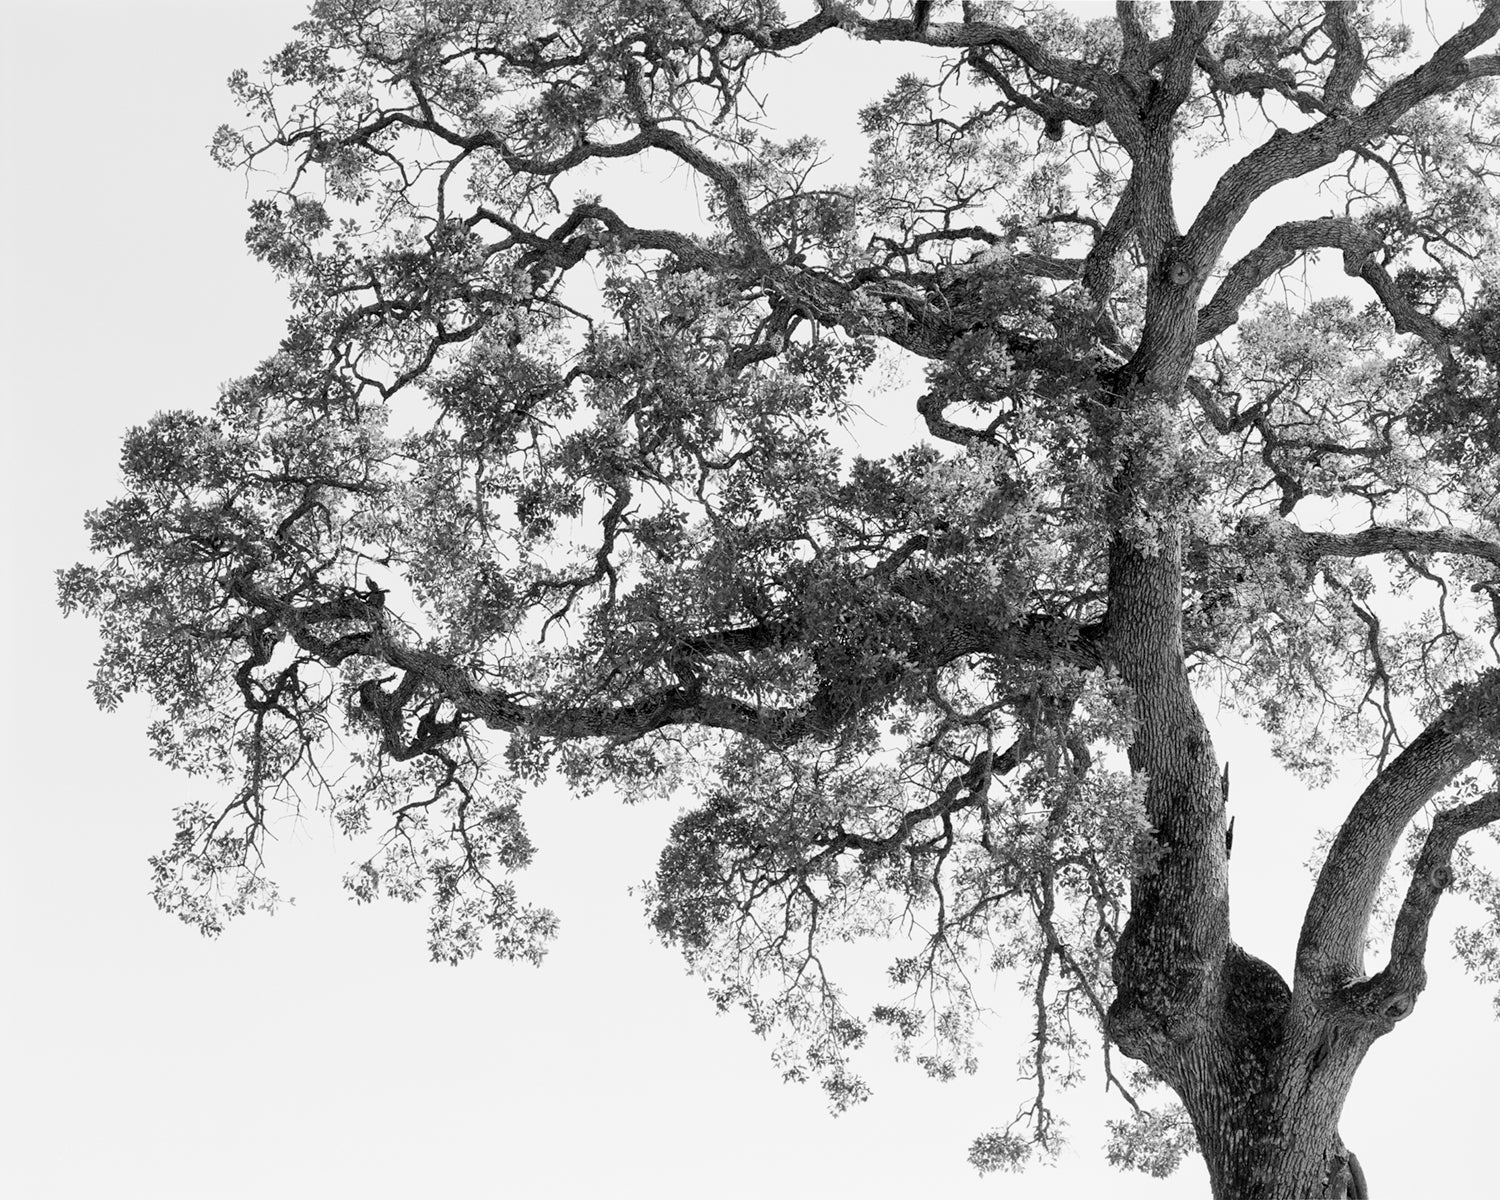 Film study of an oak tree by Mike Basher